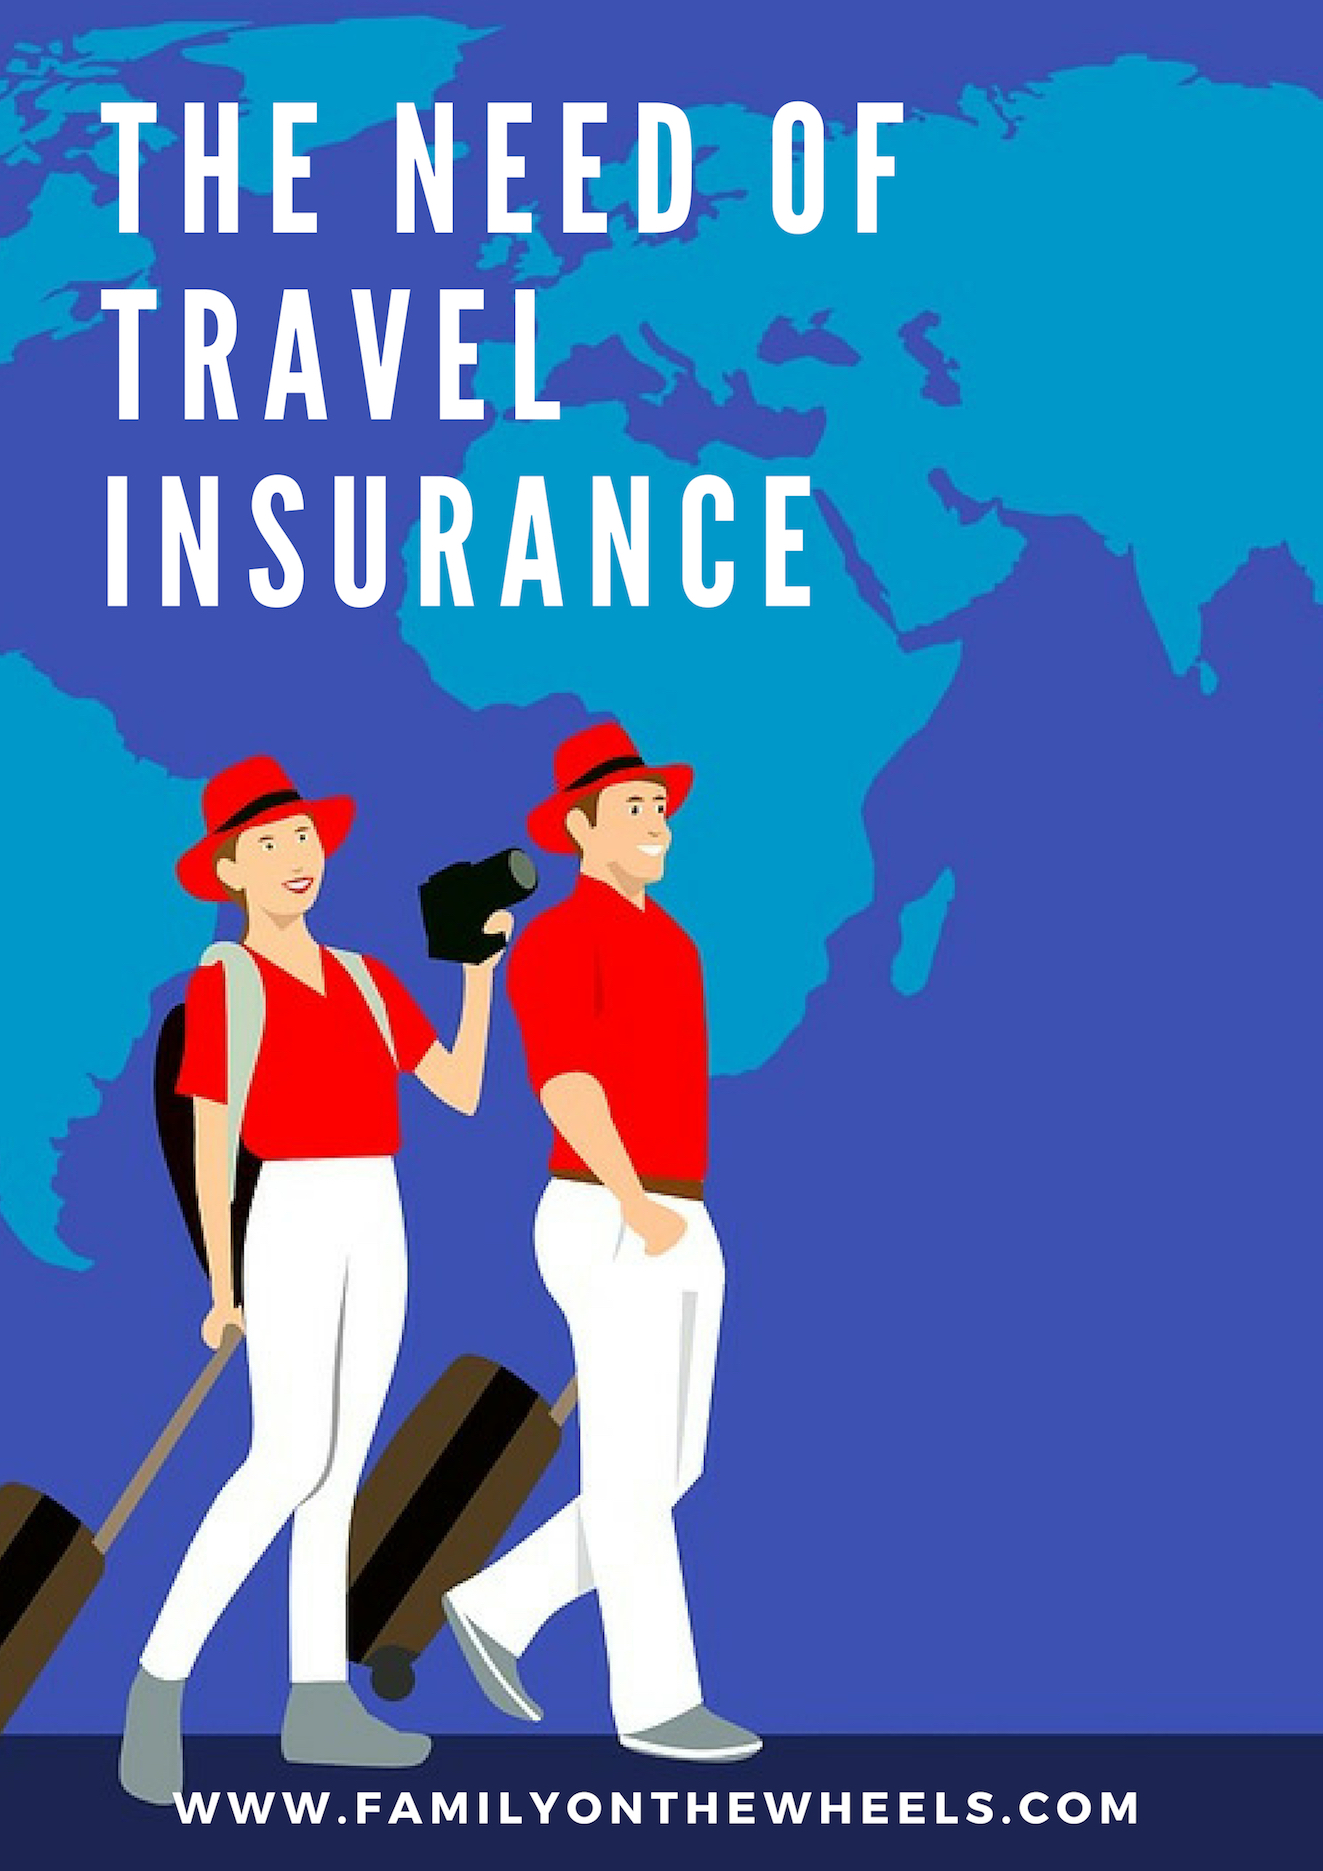 Why do we need Travel Insurance? - Family on the wheels